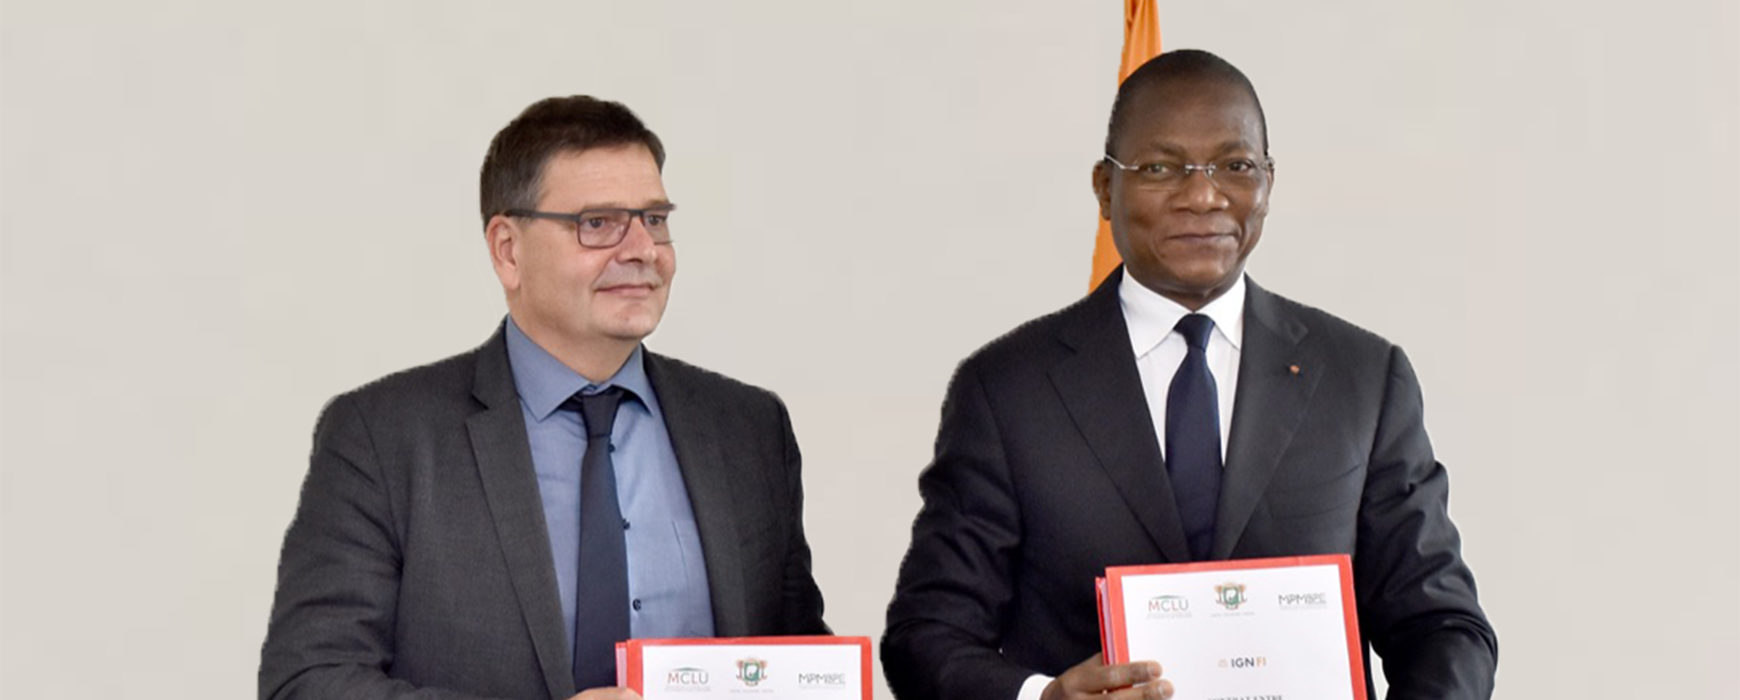 Export financing: IGN FI to digitise Ivory Coast’s land administration system thanks to a buyer credit from Bpifrance